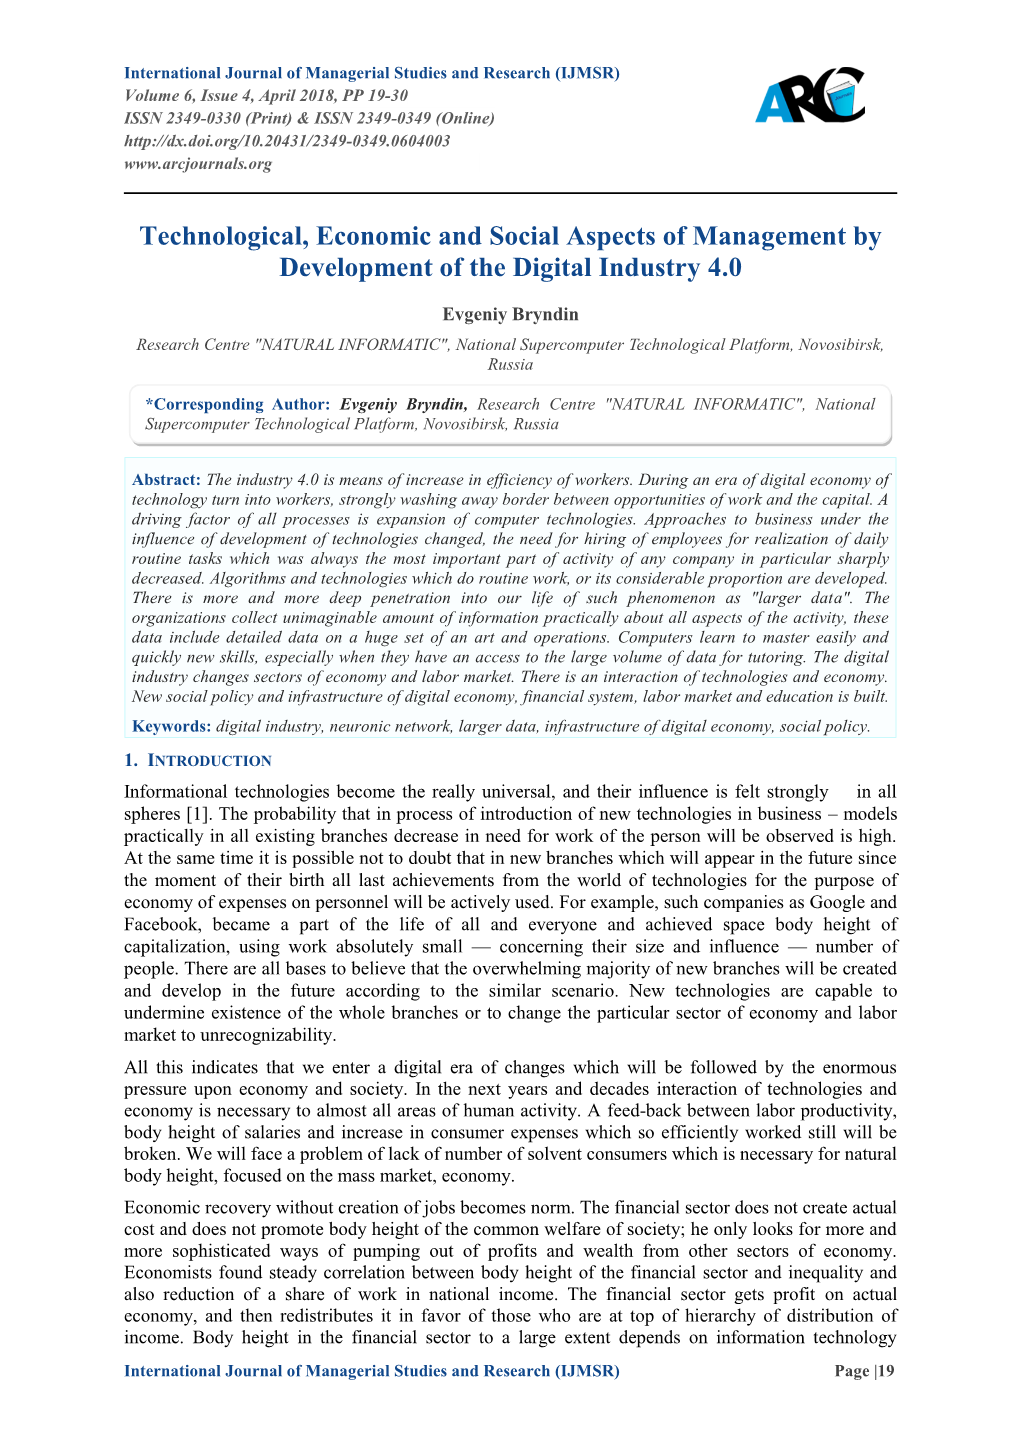 Technological, Economic and Social Aspects of Management by Development of the Digital Industry 4.0